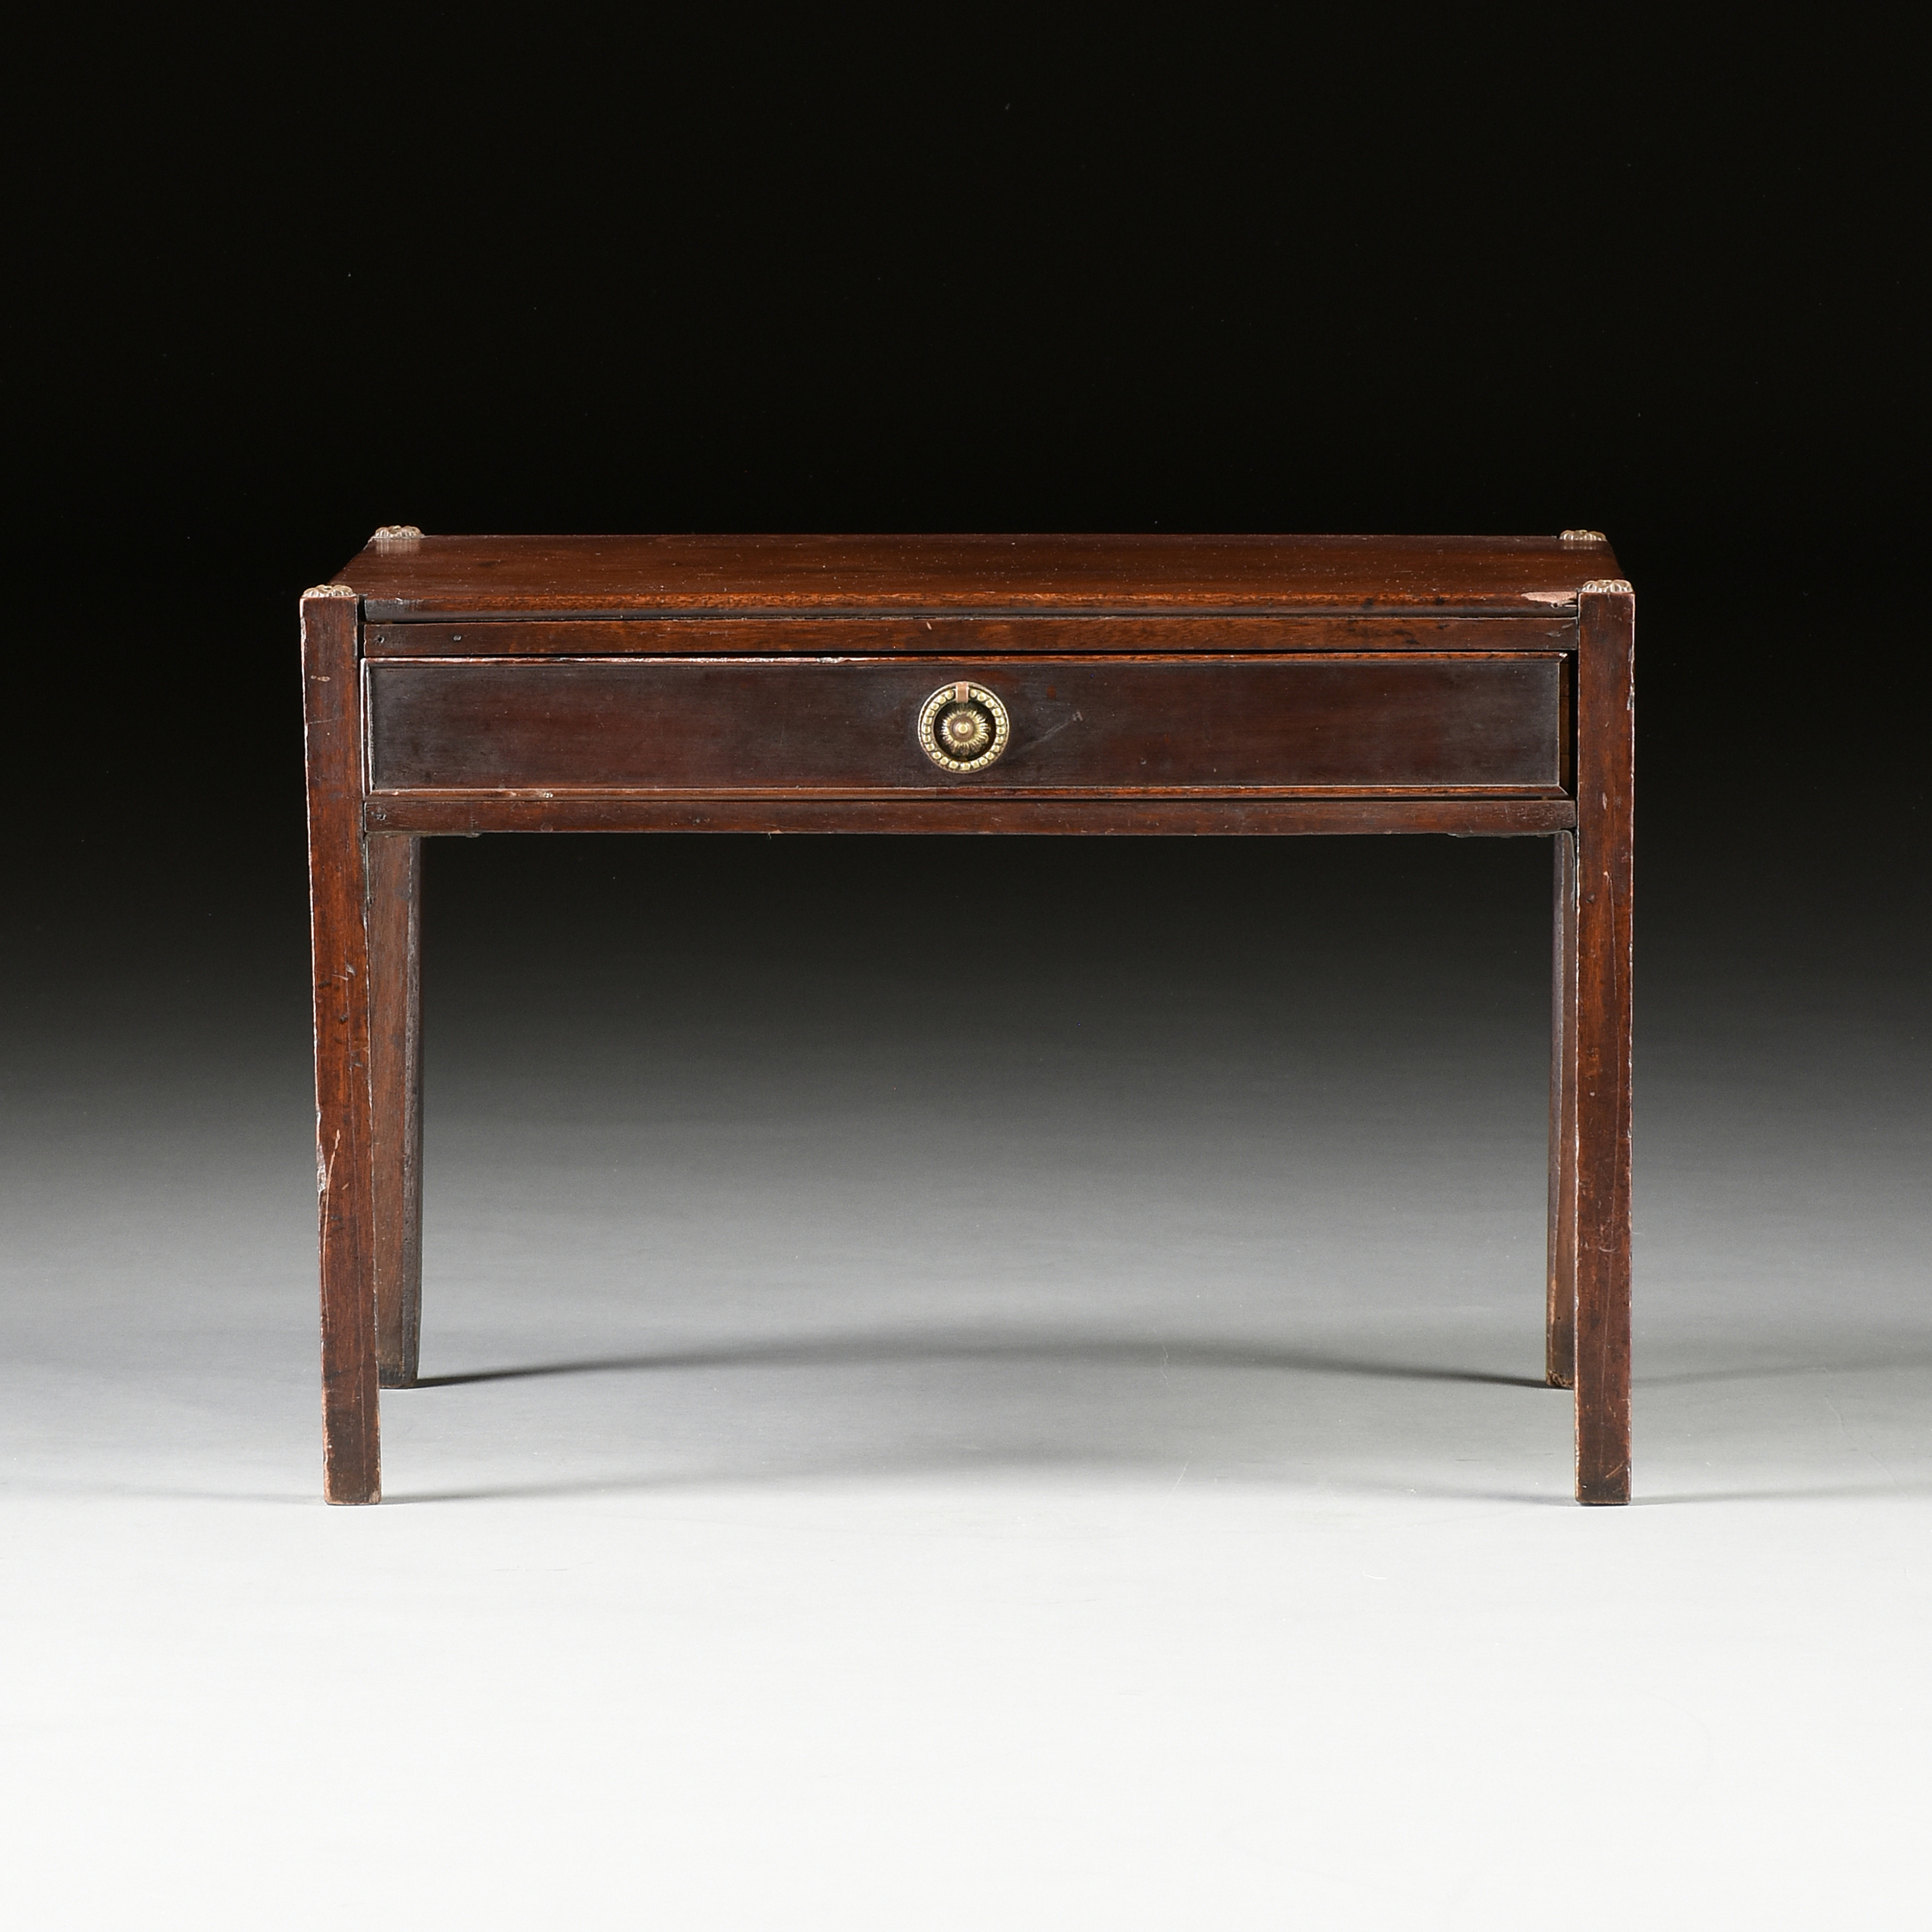 A GEORGE III MAHOGANY LOW SIDE TABLE, LATE 18TH/EARLY 19TH CENTURY, the rectangular top above a